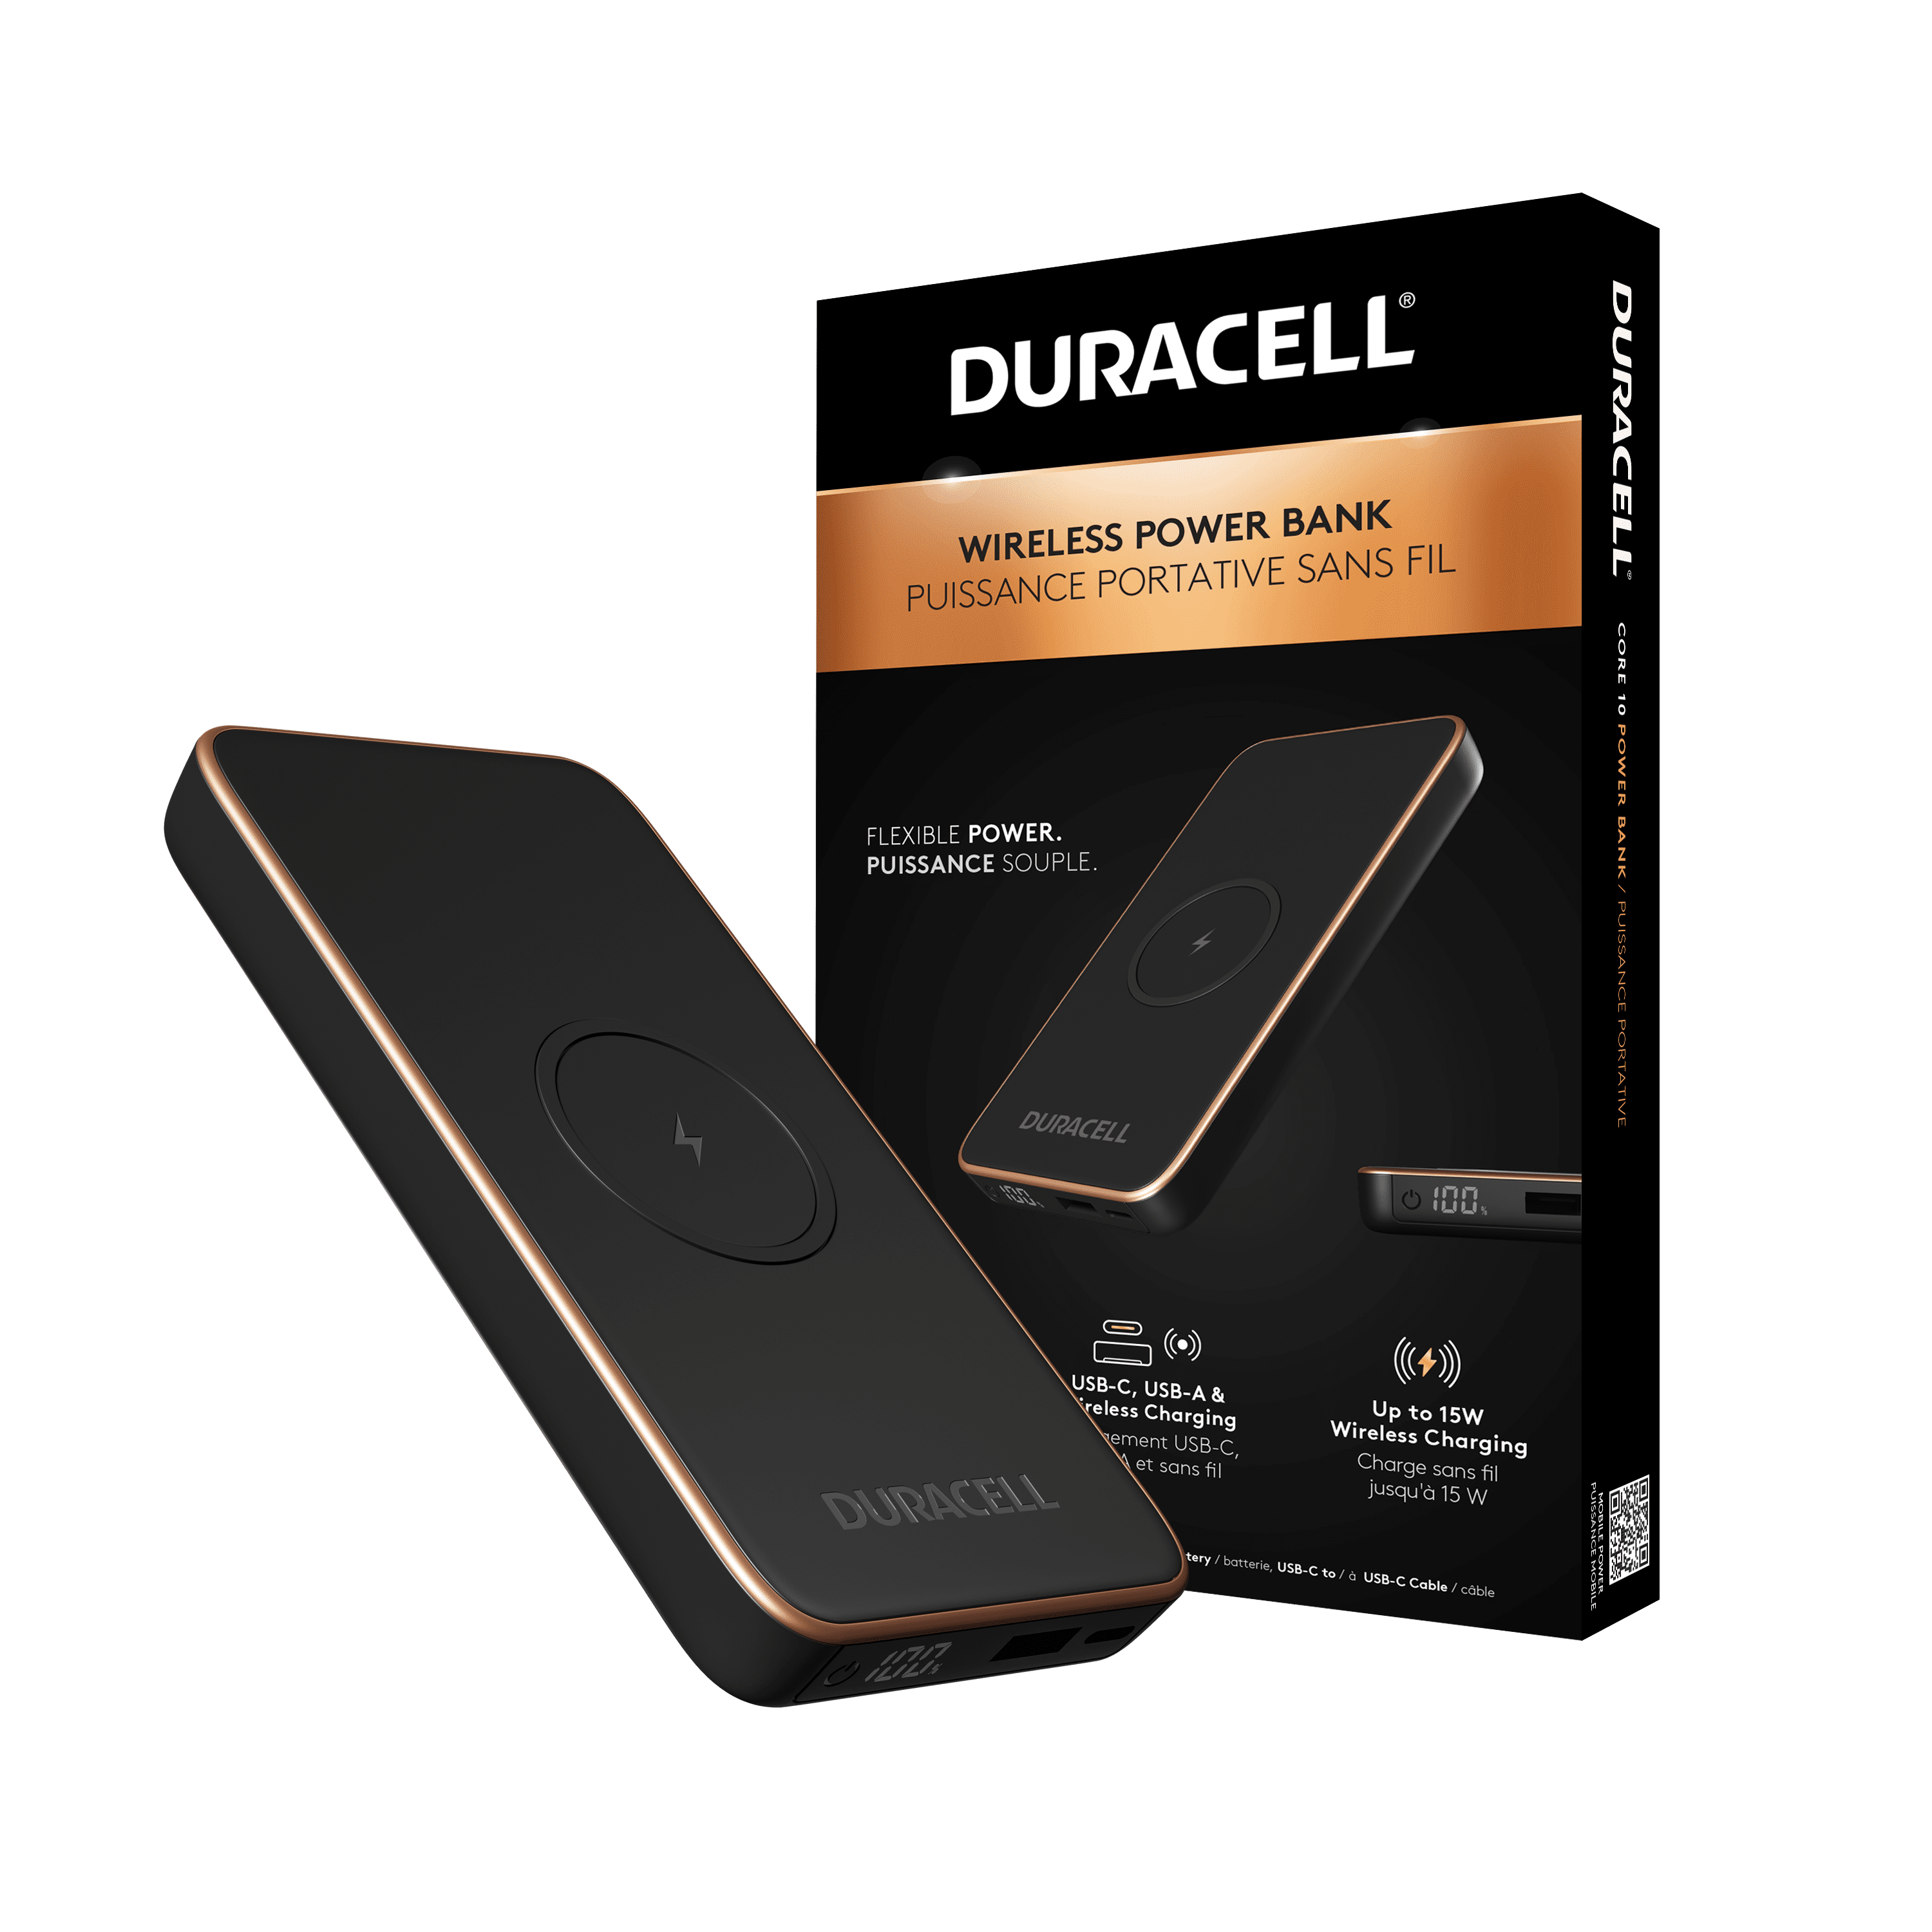 Duracell Core 10 Portable Power Pack, 10000mAh Wireless Mobile